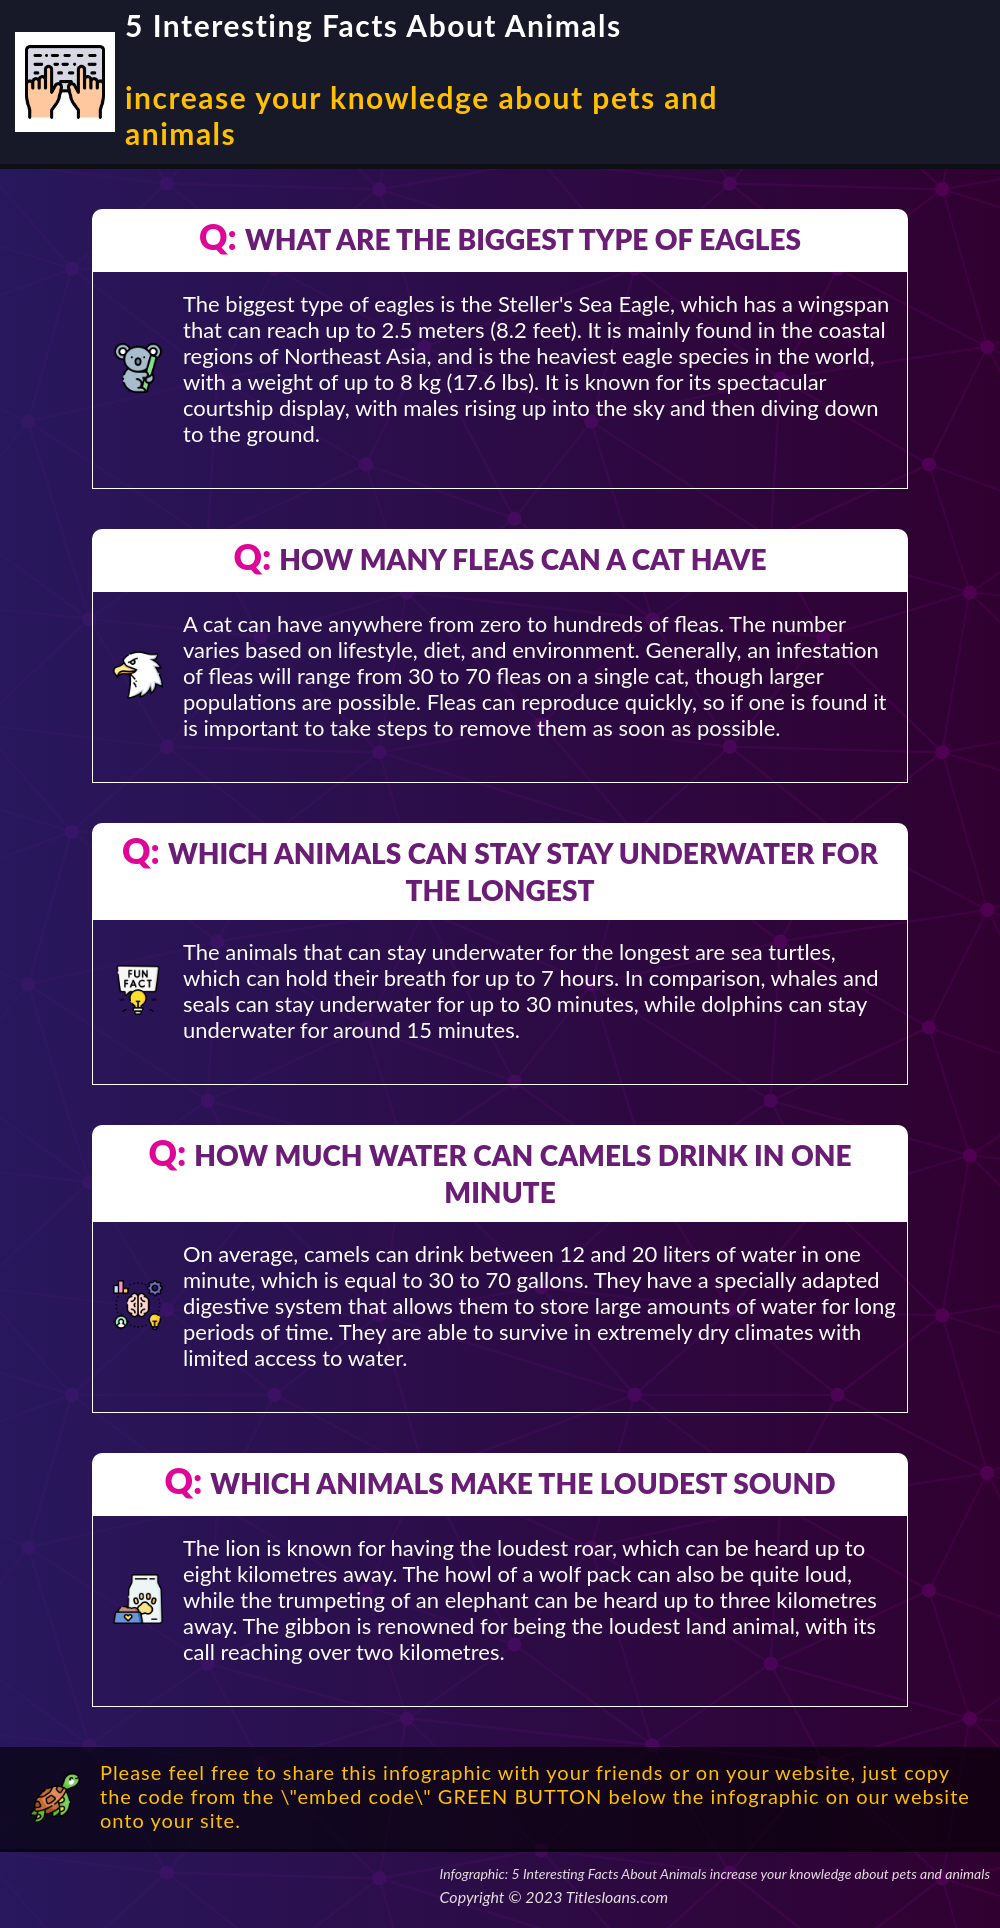 Infographic: 5 Interesting Facts About Animals increase your knowledge about pets and animals